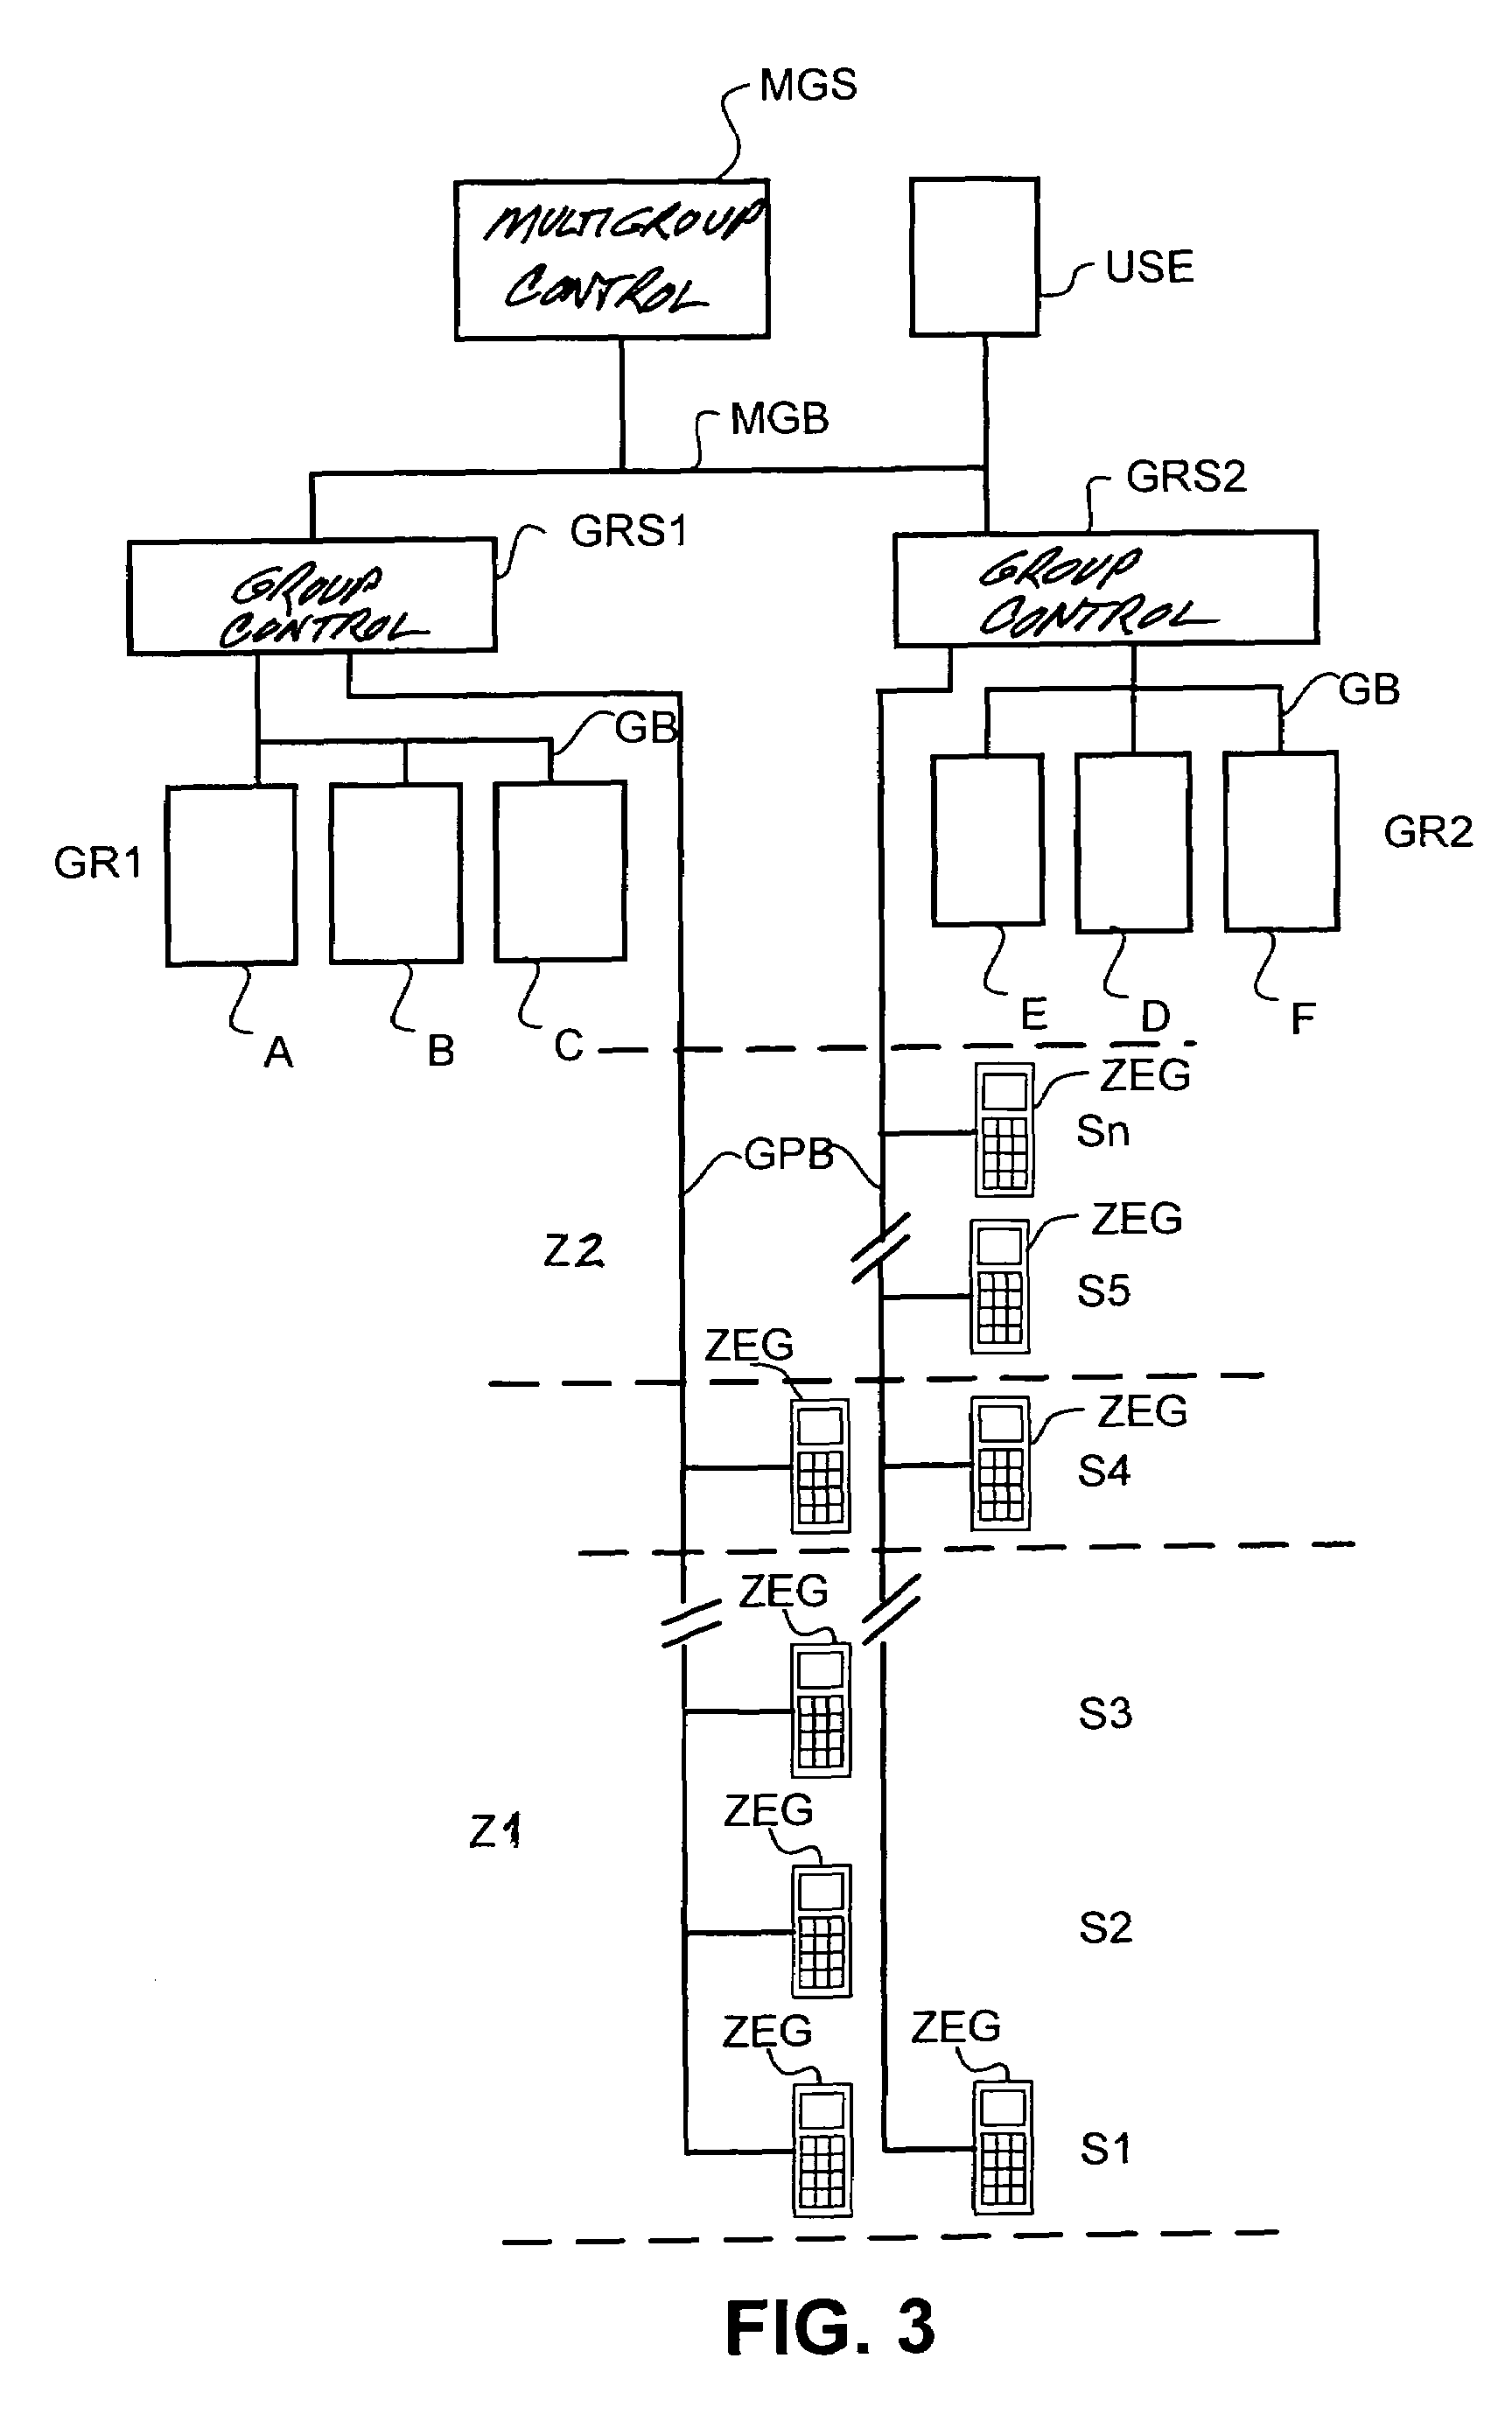 Method and apparatus for controlling an elevator installation with zoning and an interchange floor